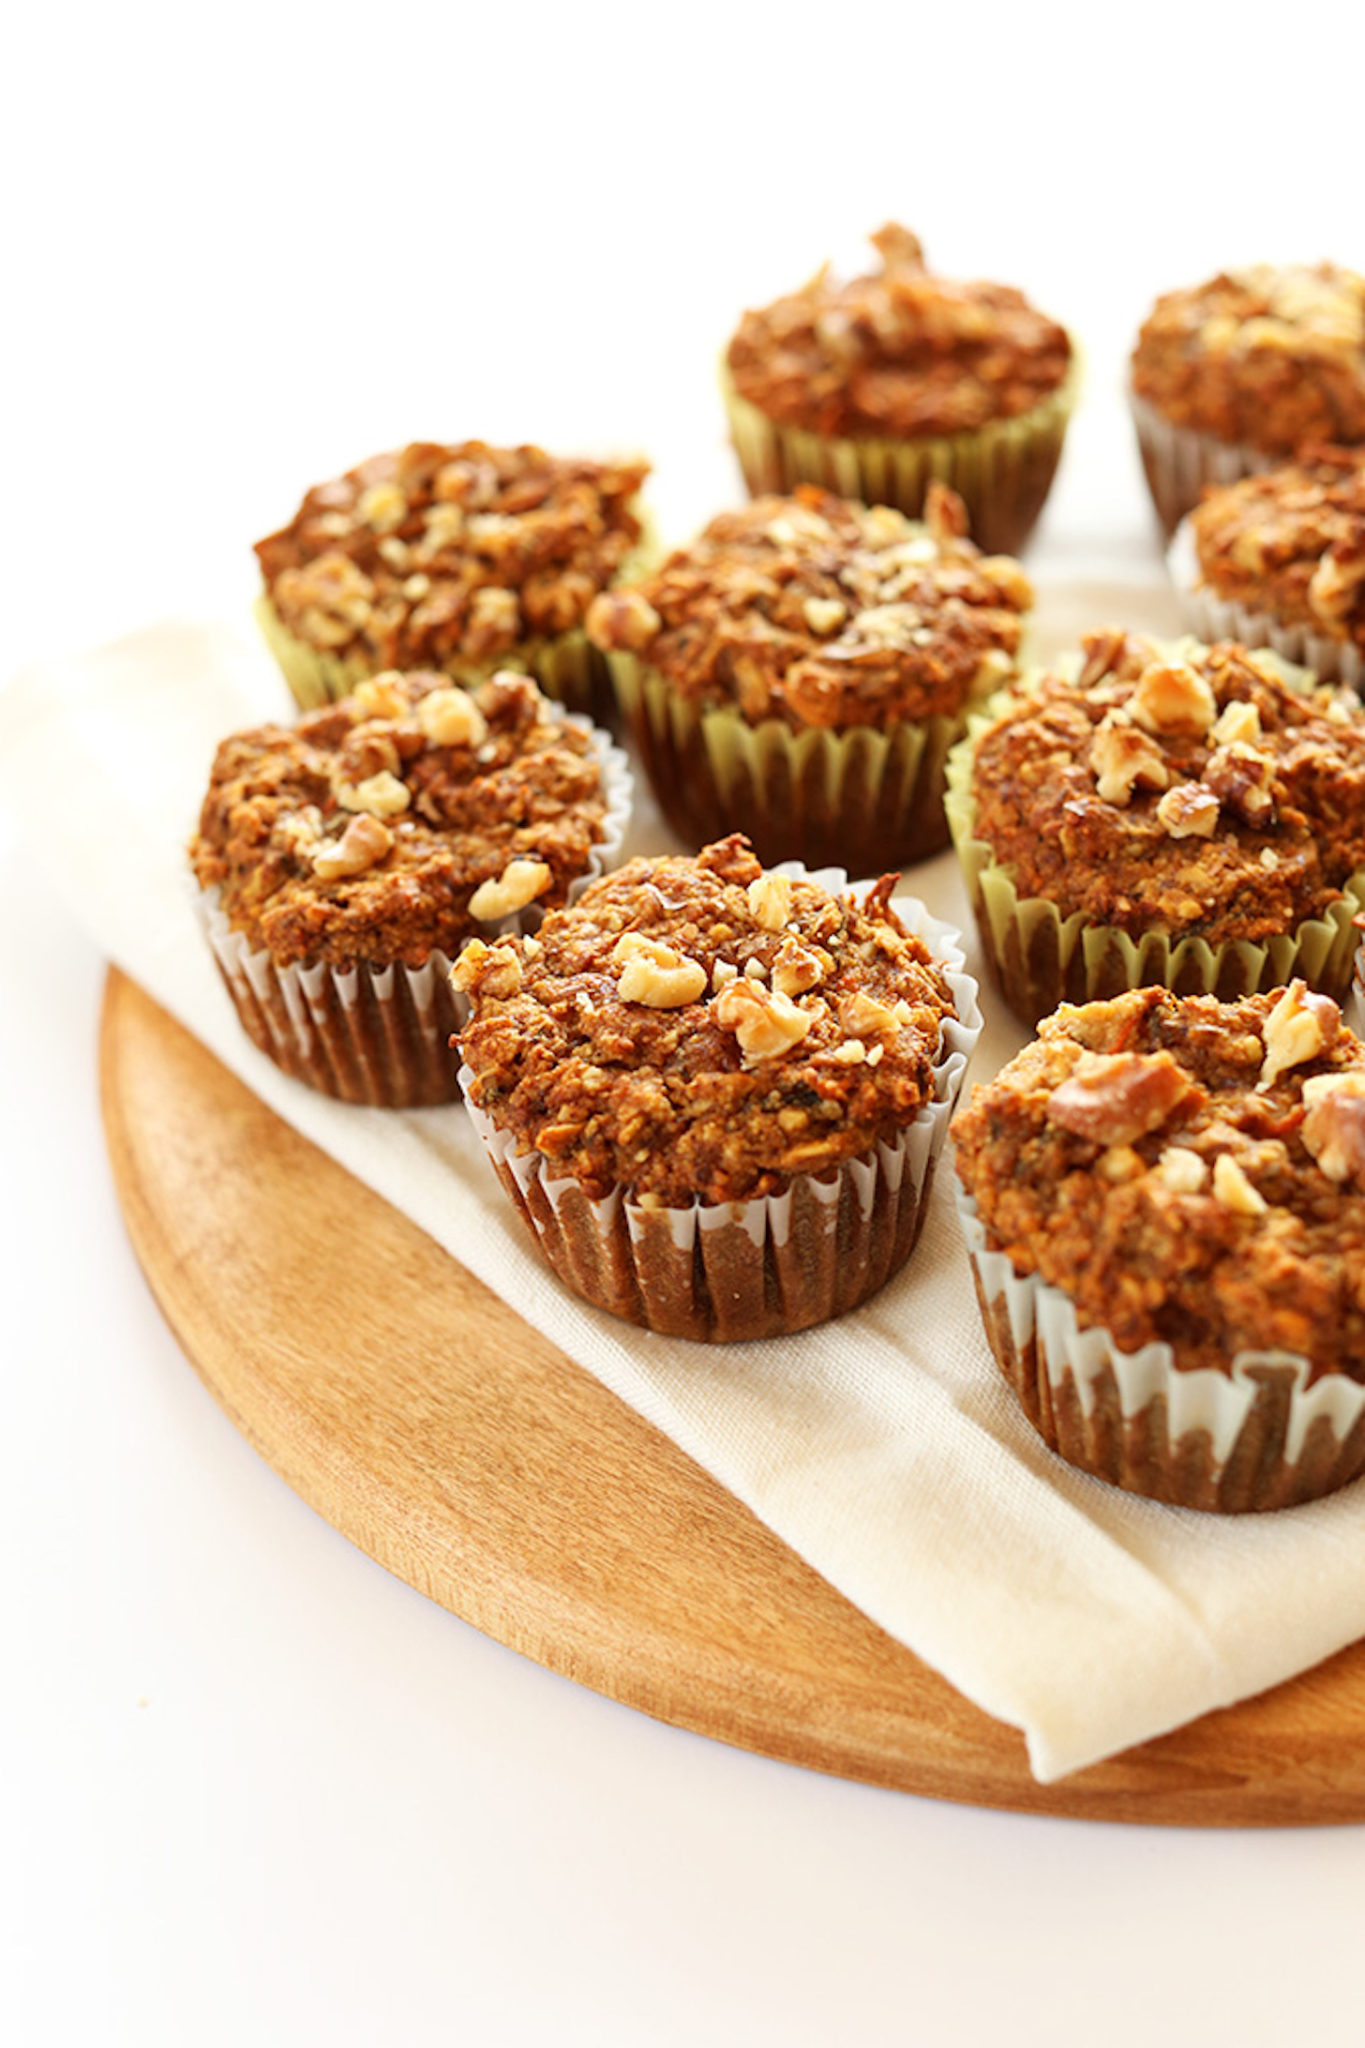 Batch of our simple gluten-free vegan healthy carrot muffins.